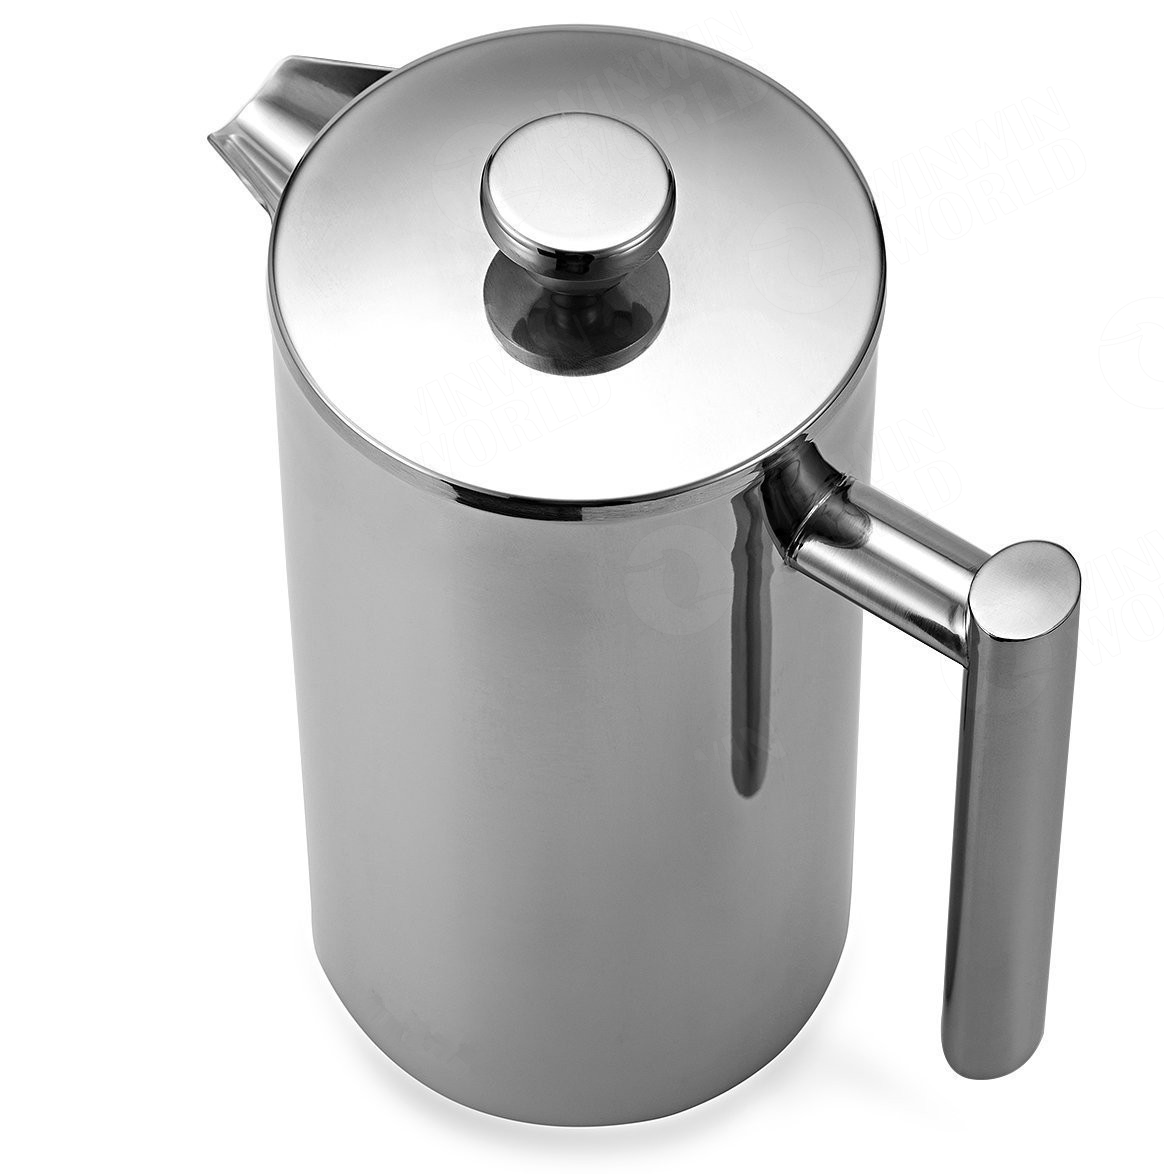 Good Price Coffee Maker Cold Press Stainless Steel Manual French Press Latte Coffee Machine on Sale